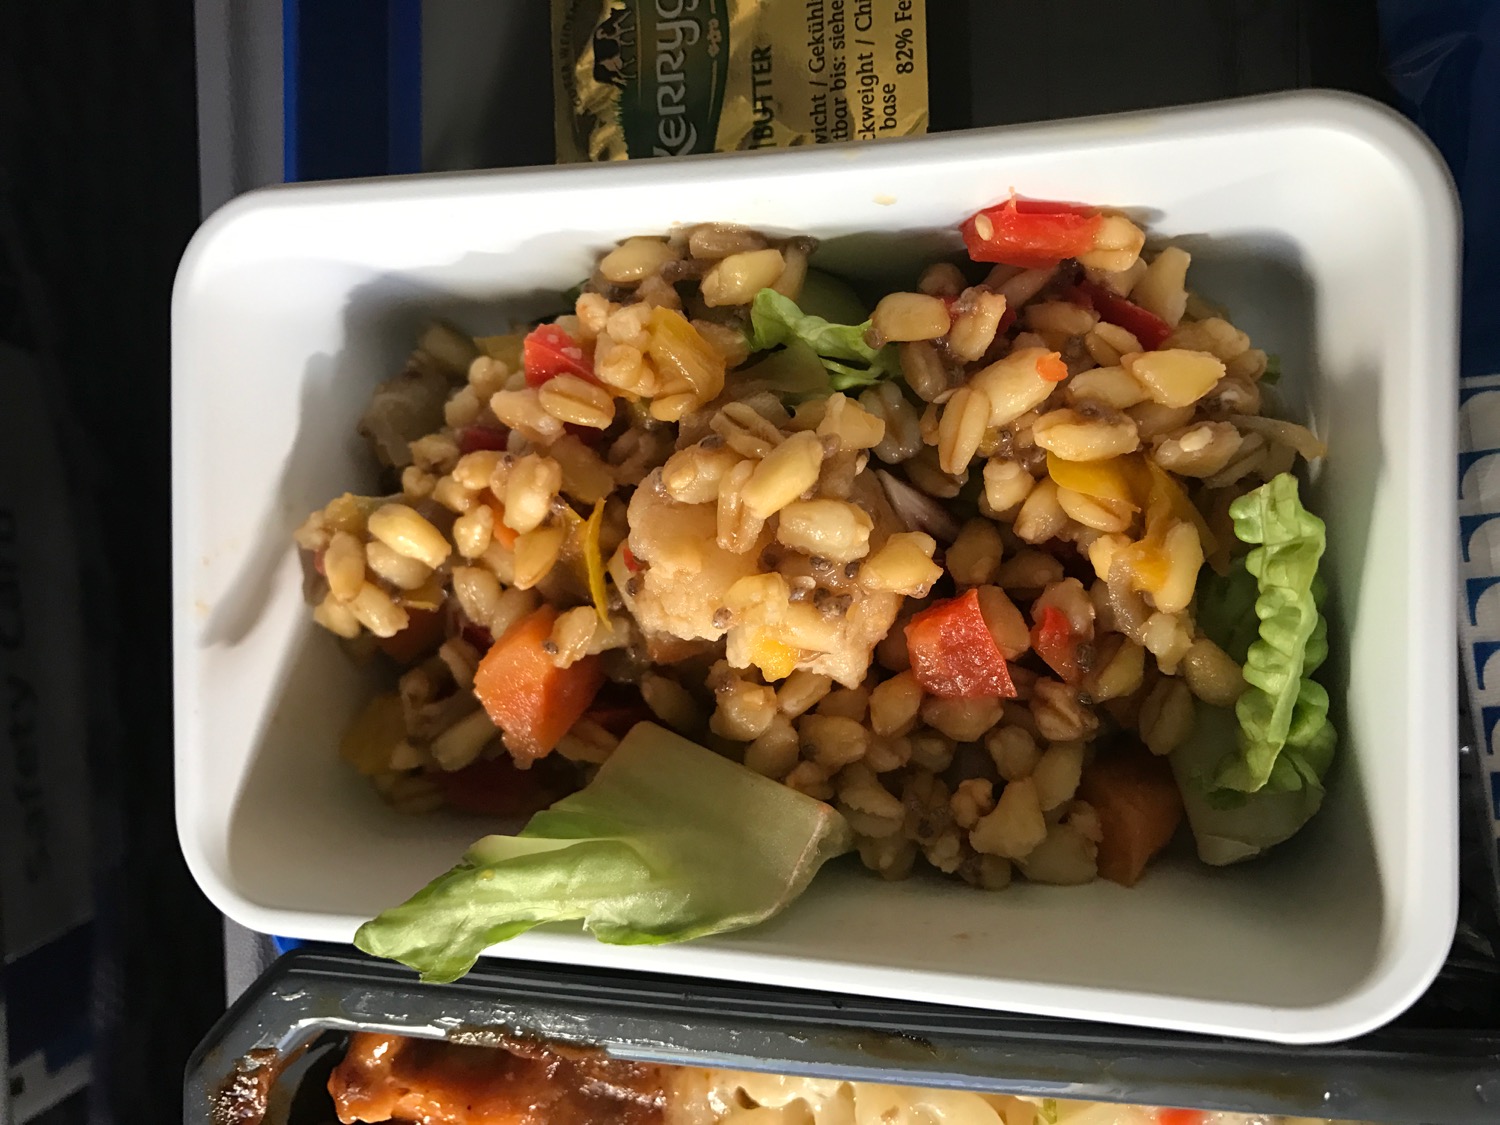 United AMS-IAH Economy Class Meal - 6